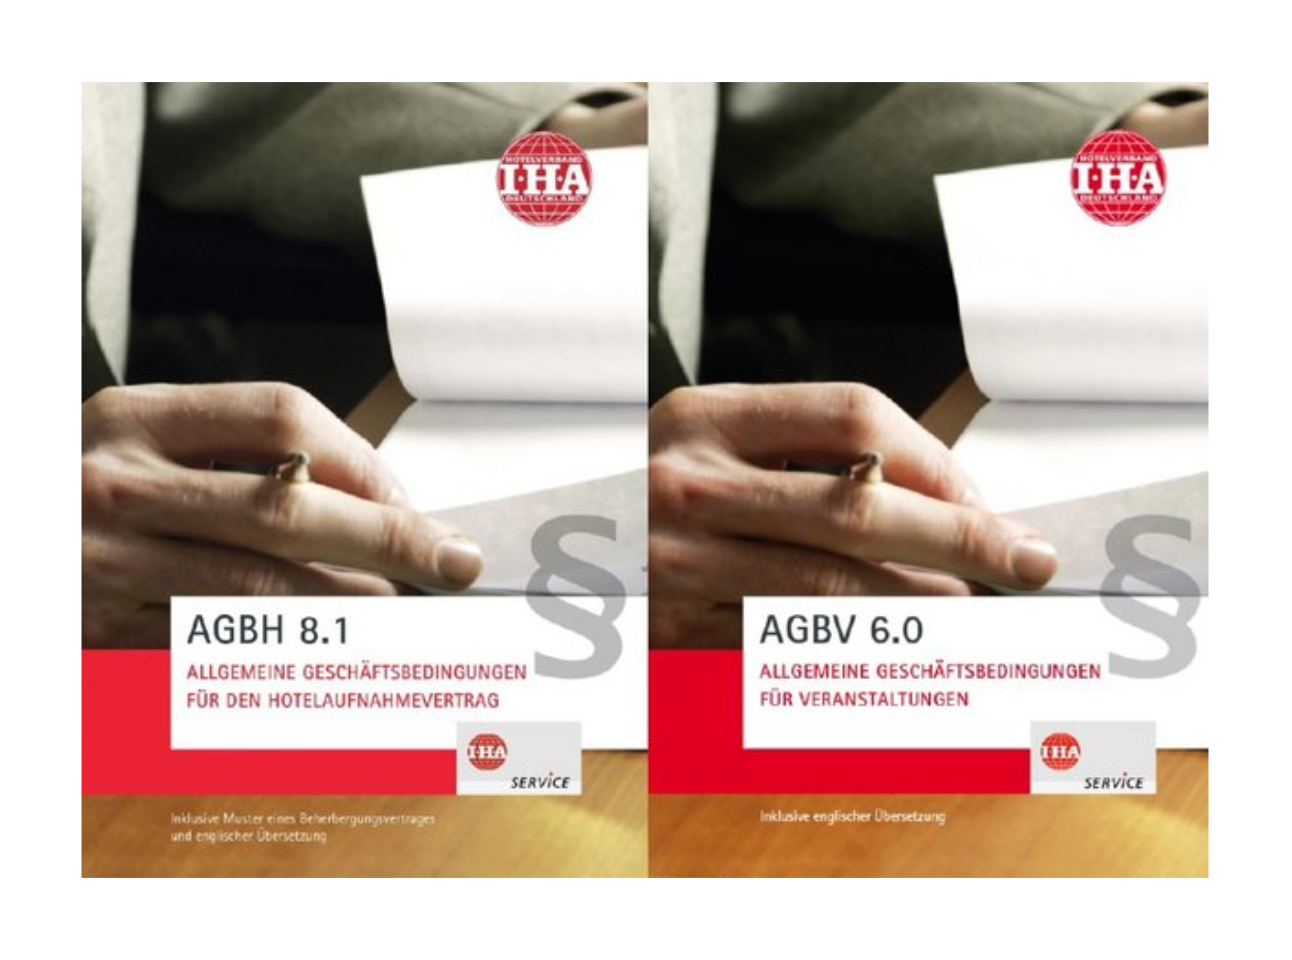 AGB-2er-Package (AGBH und AGBV)